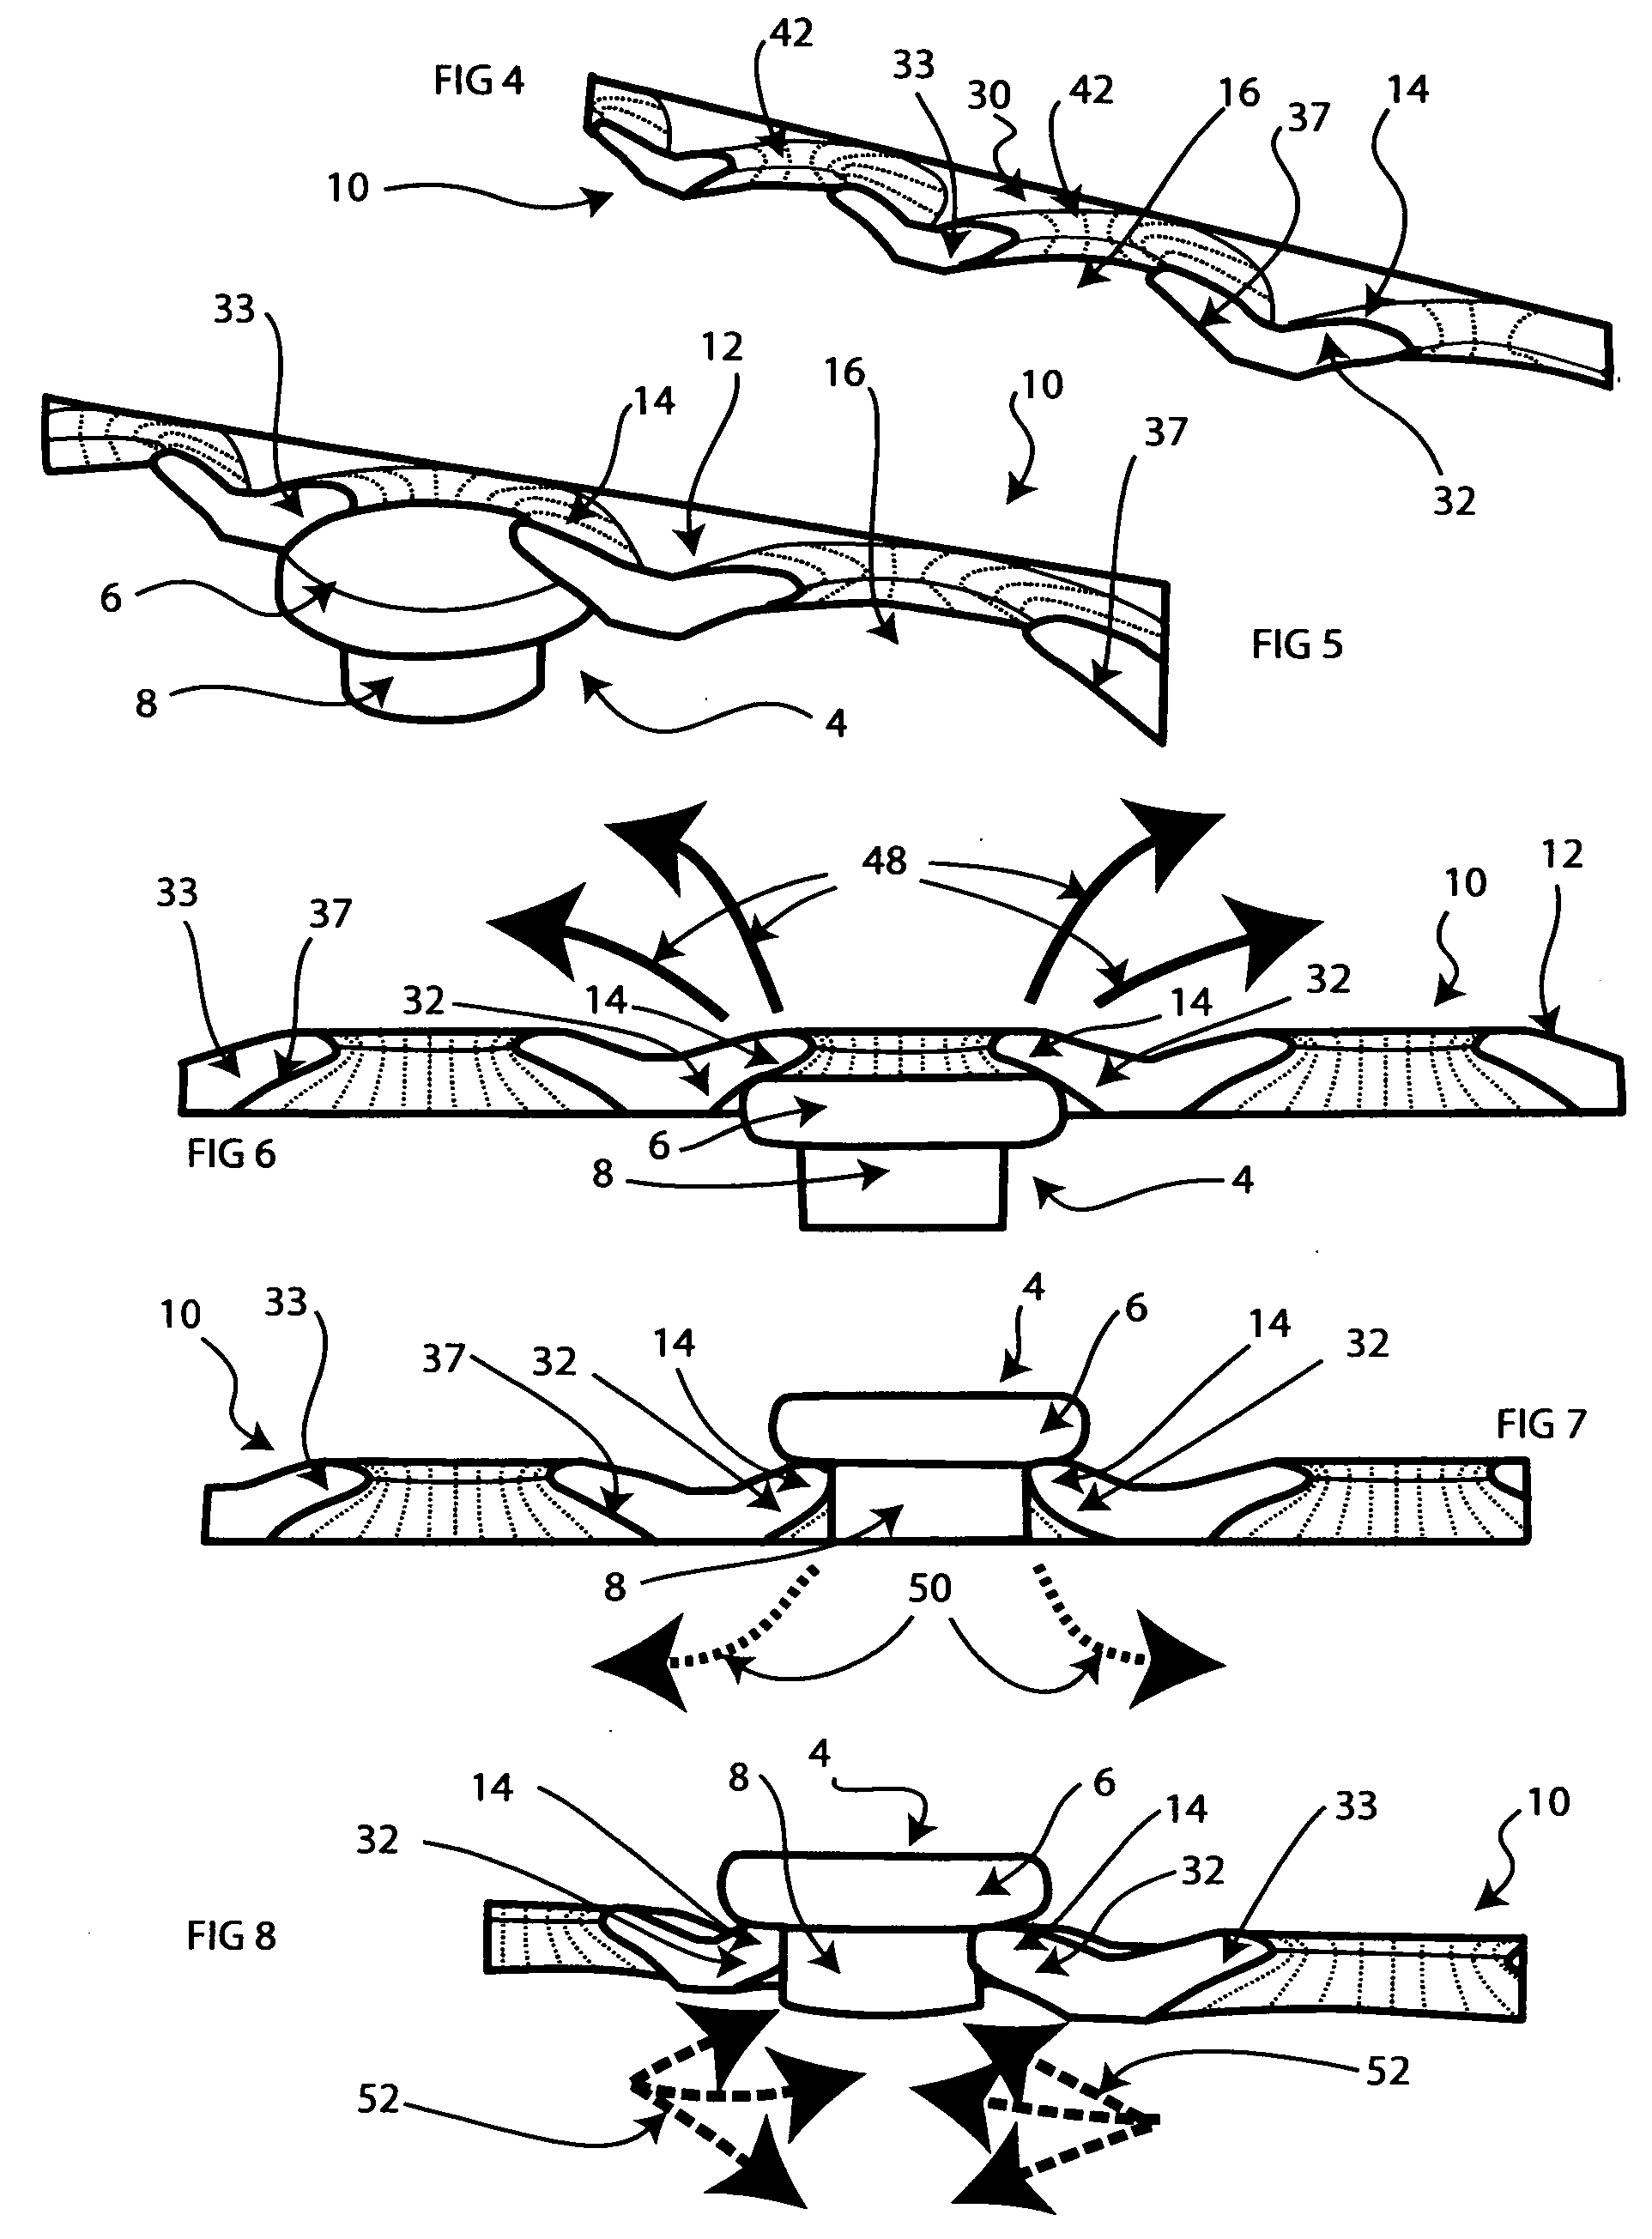 Multi-use adjustable bellows-shaped aperture strap